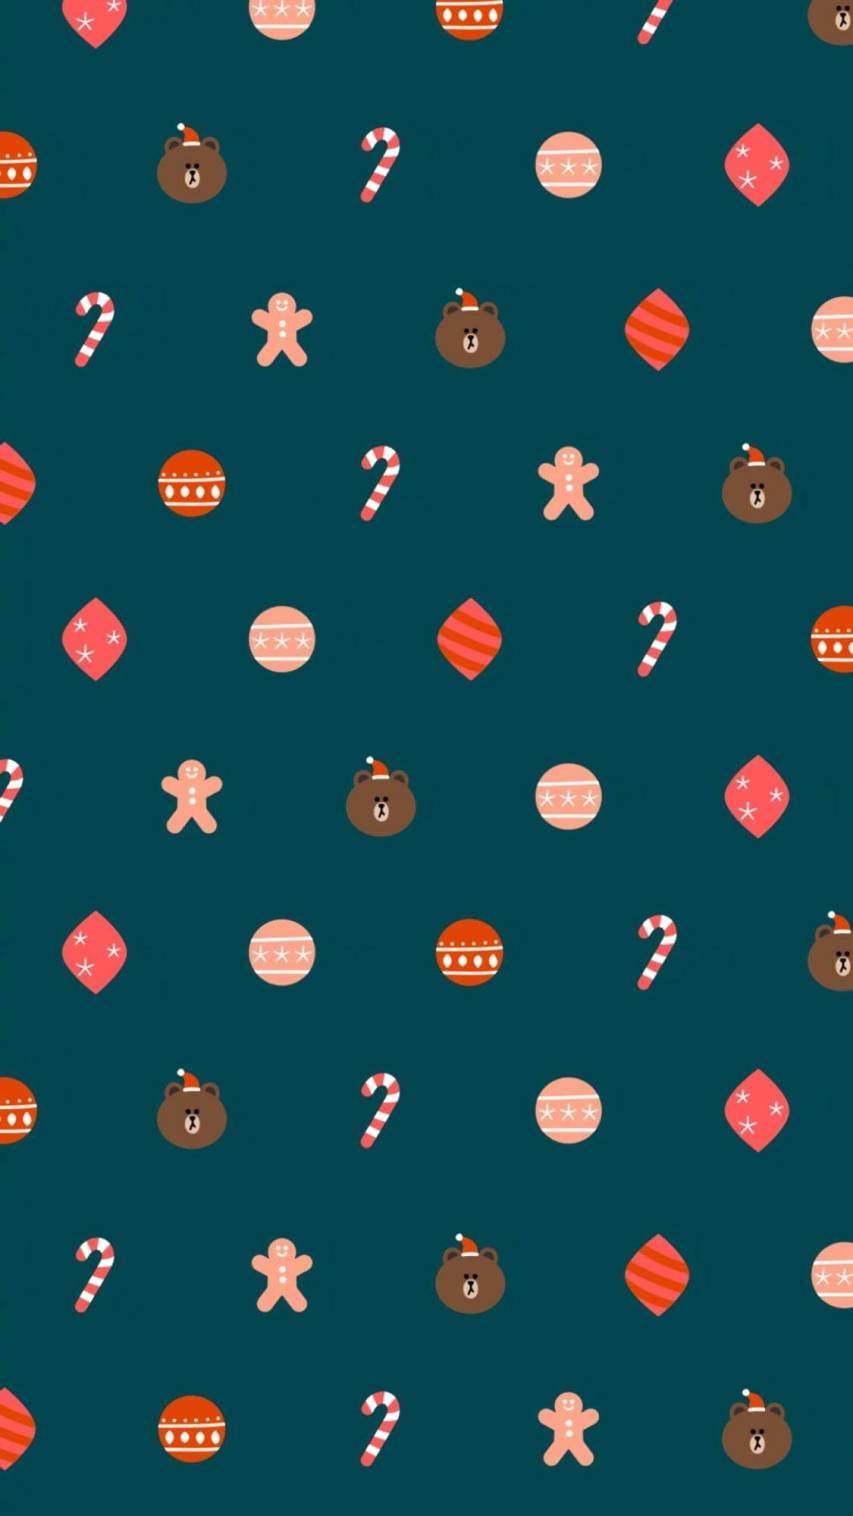 Christmas wallpaper for iPhone X from the holiday emoticon collection - Simple